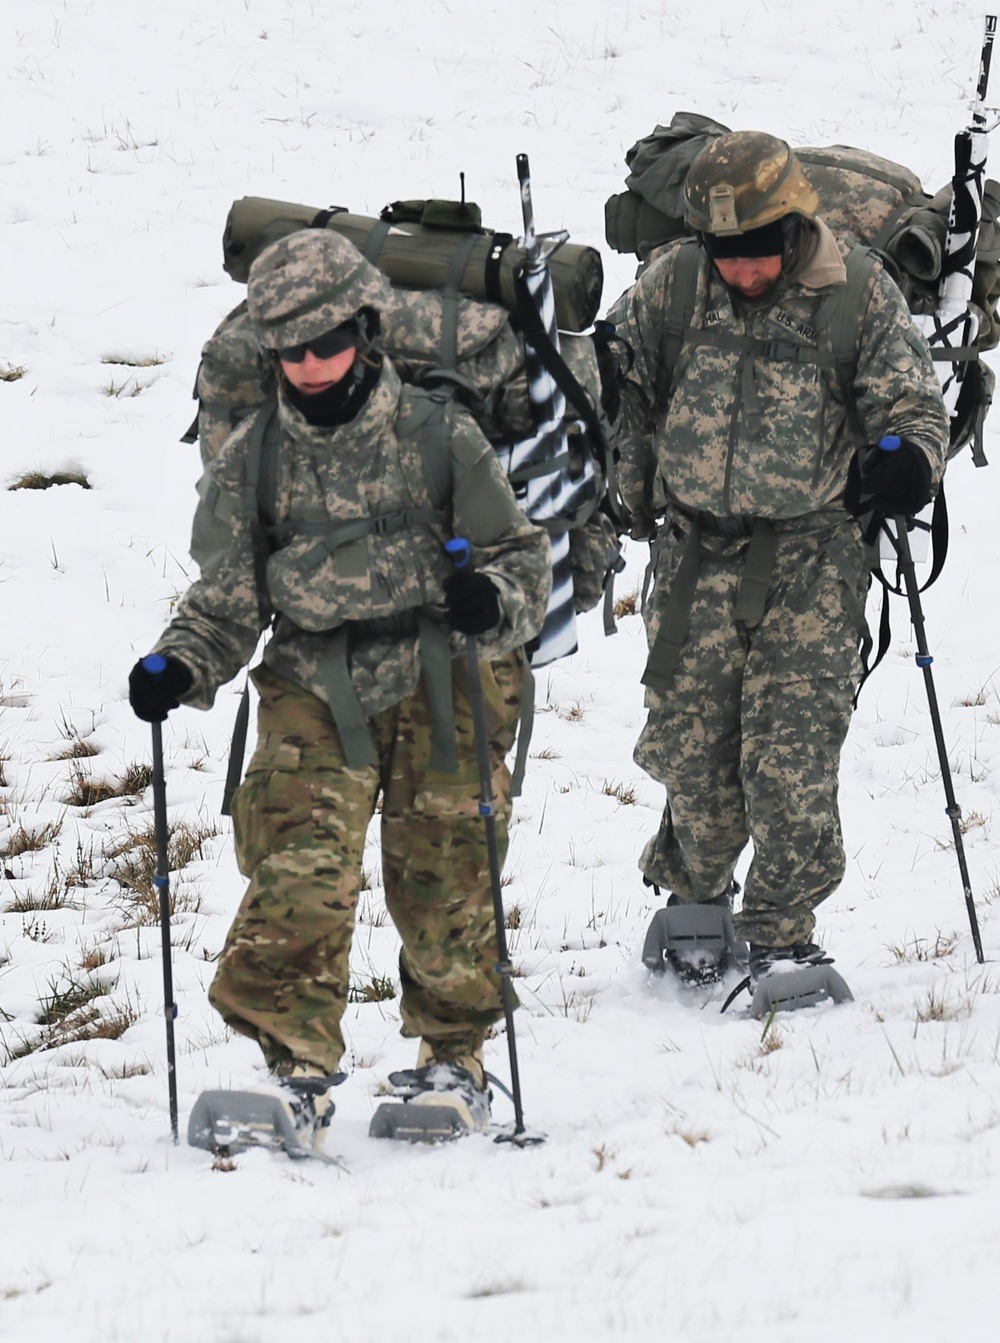 Women’s History Month: Many women among those completing arduous CWOC training at Fort McCoy